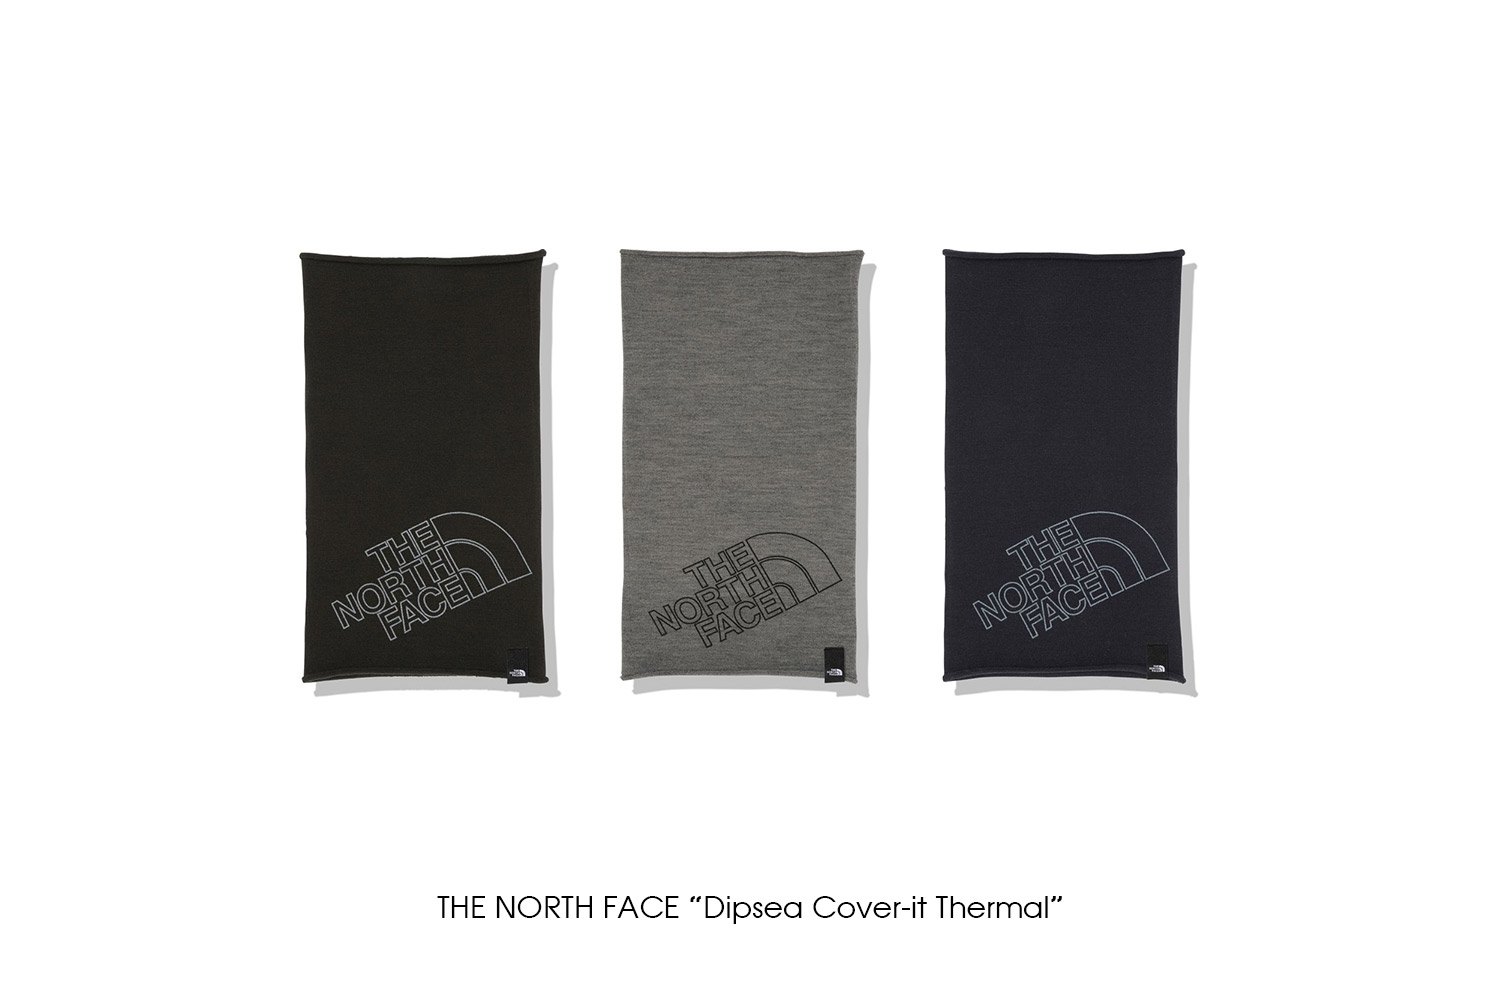 THE NORTH FACE "Dipsea Cover-it Thermal"